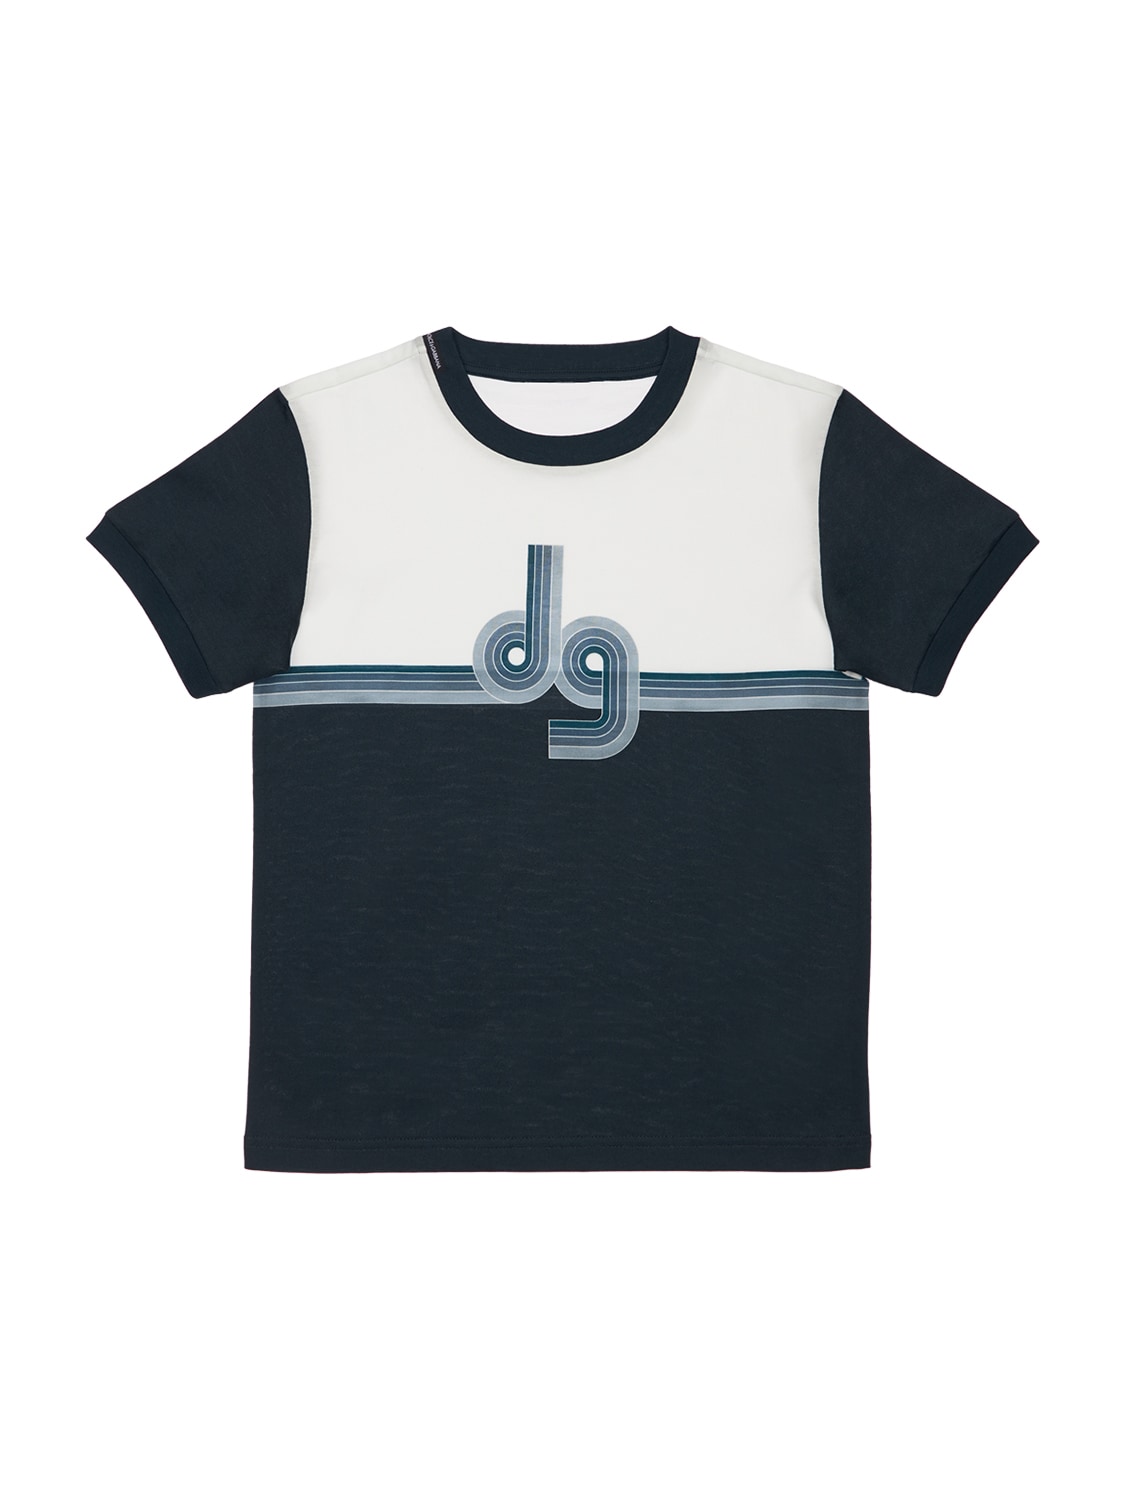 Dolce & Gabbana Kids' Printed Cotton Jersey T-shirt In Multicolor